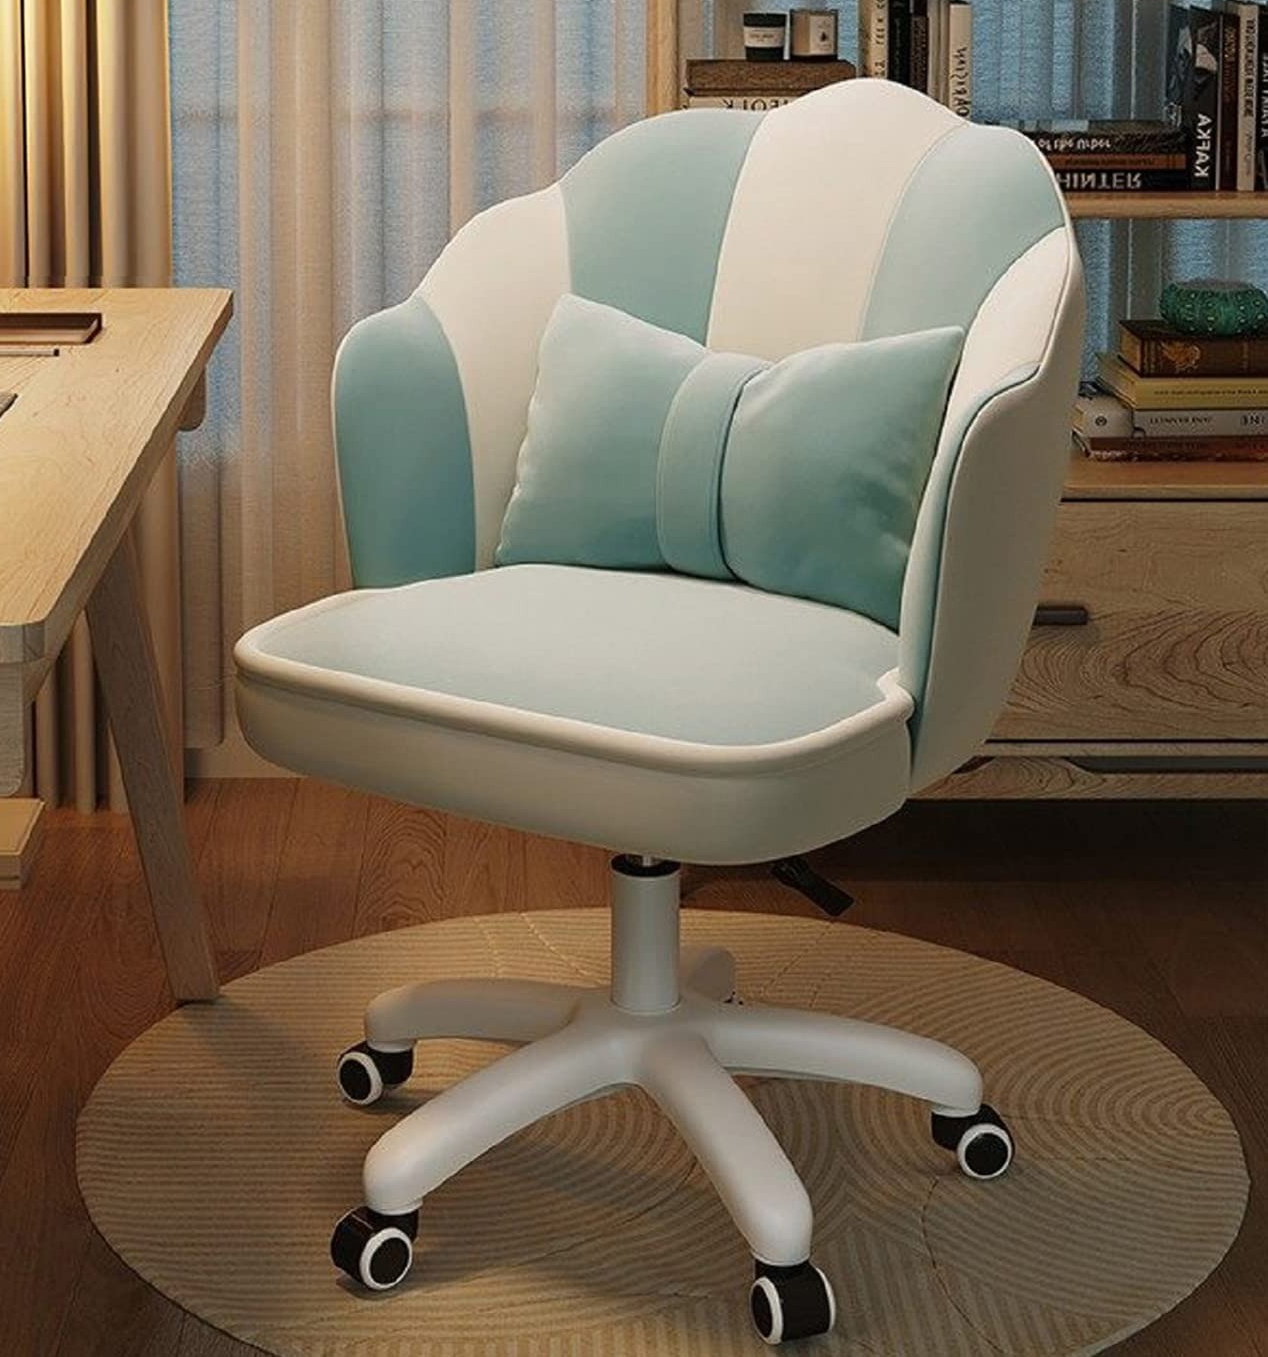 the scalloped-back desk chair in blue and cream 